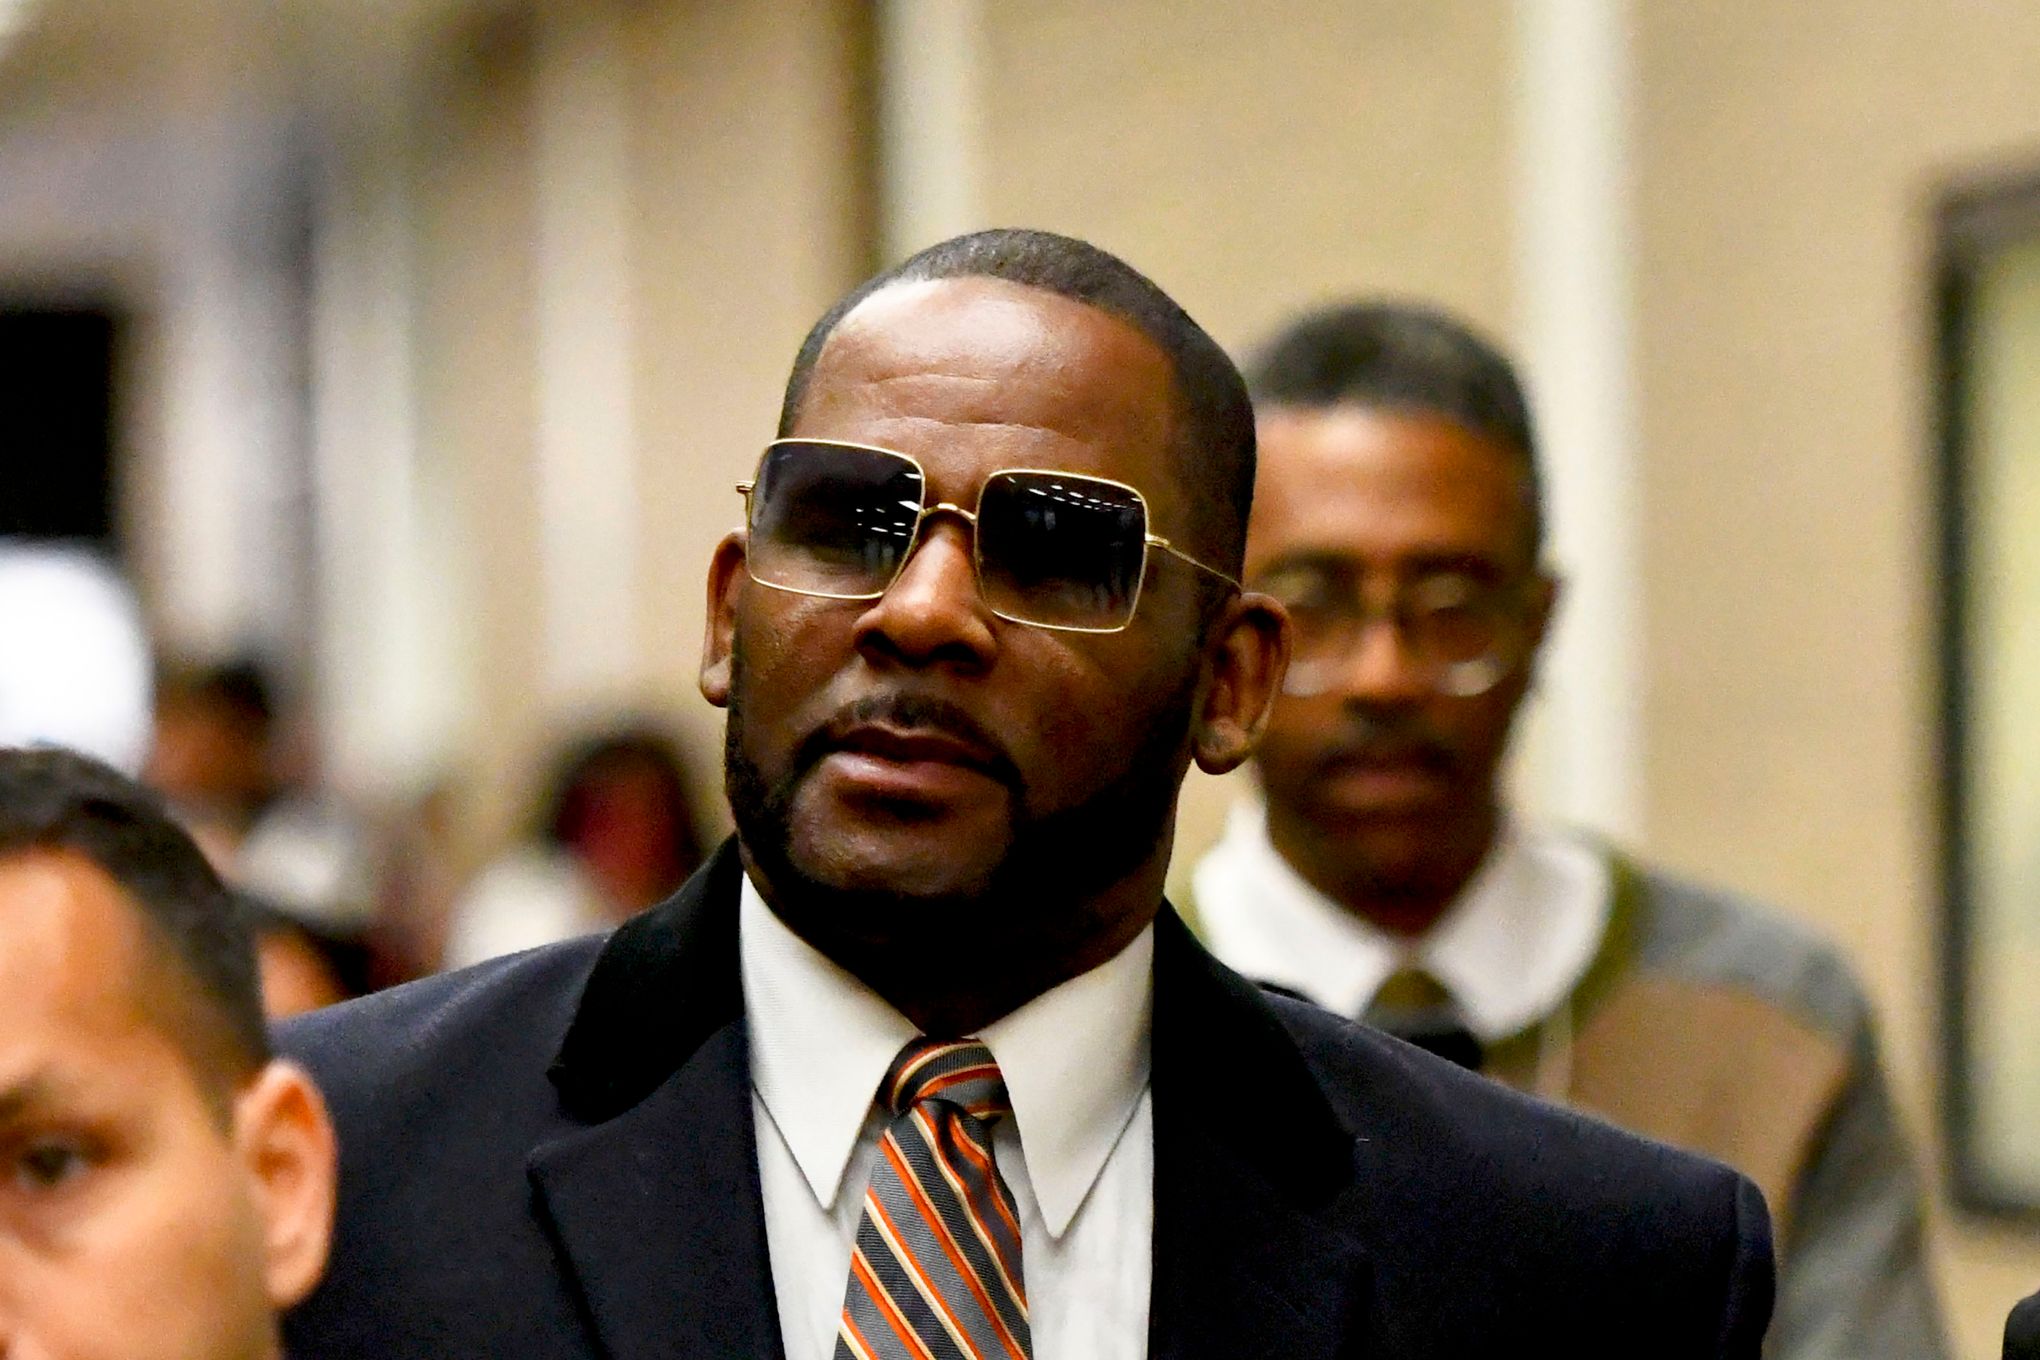 Sex A P - R. Kelly convicted of child porn, enticing girls for sex | The Seattle Times